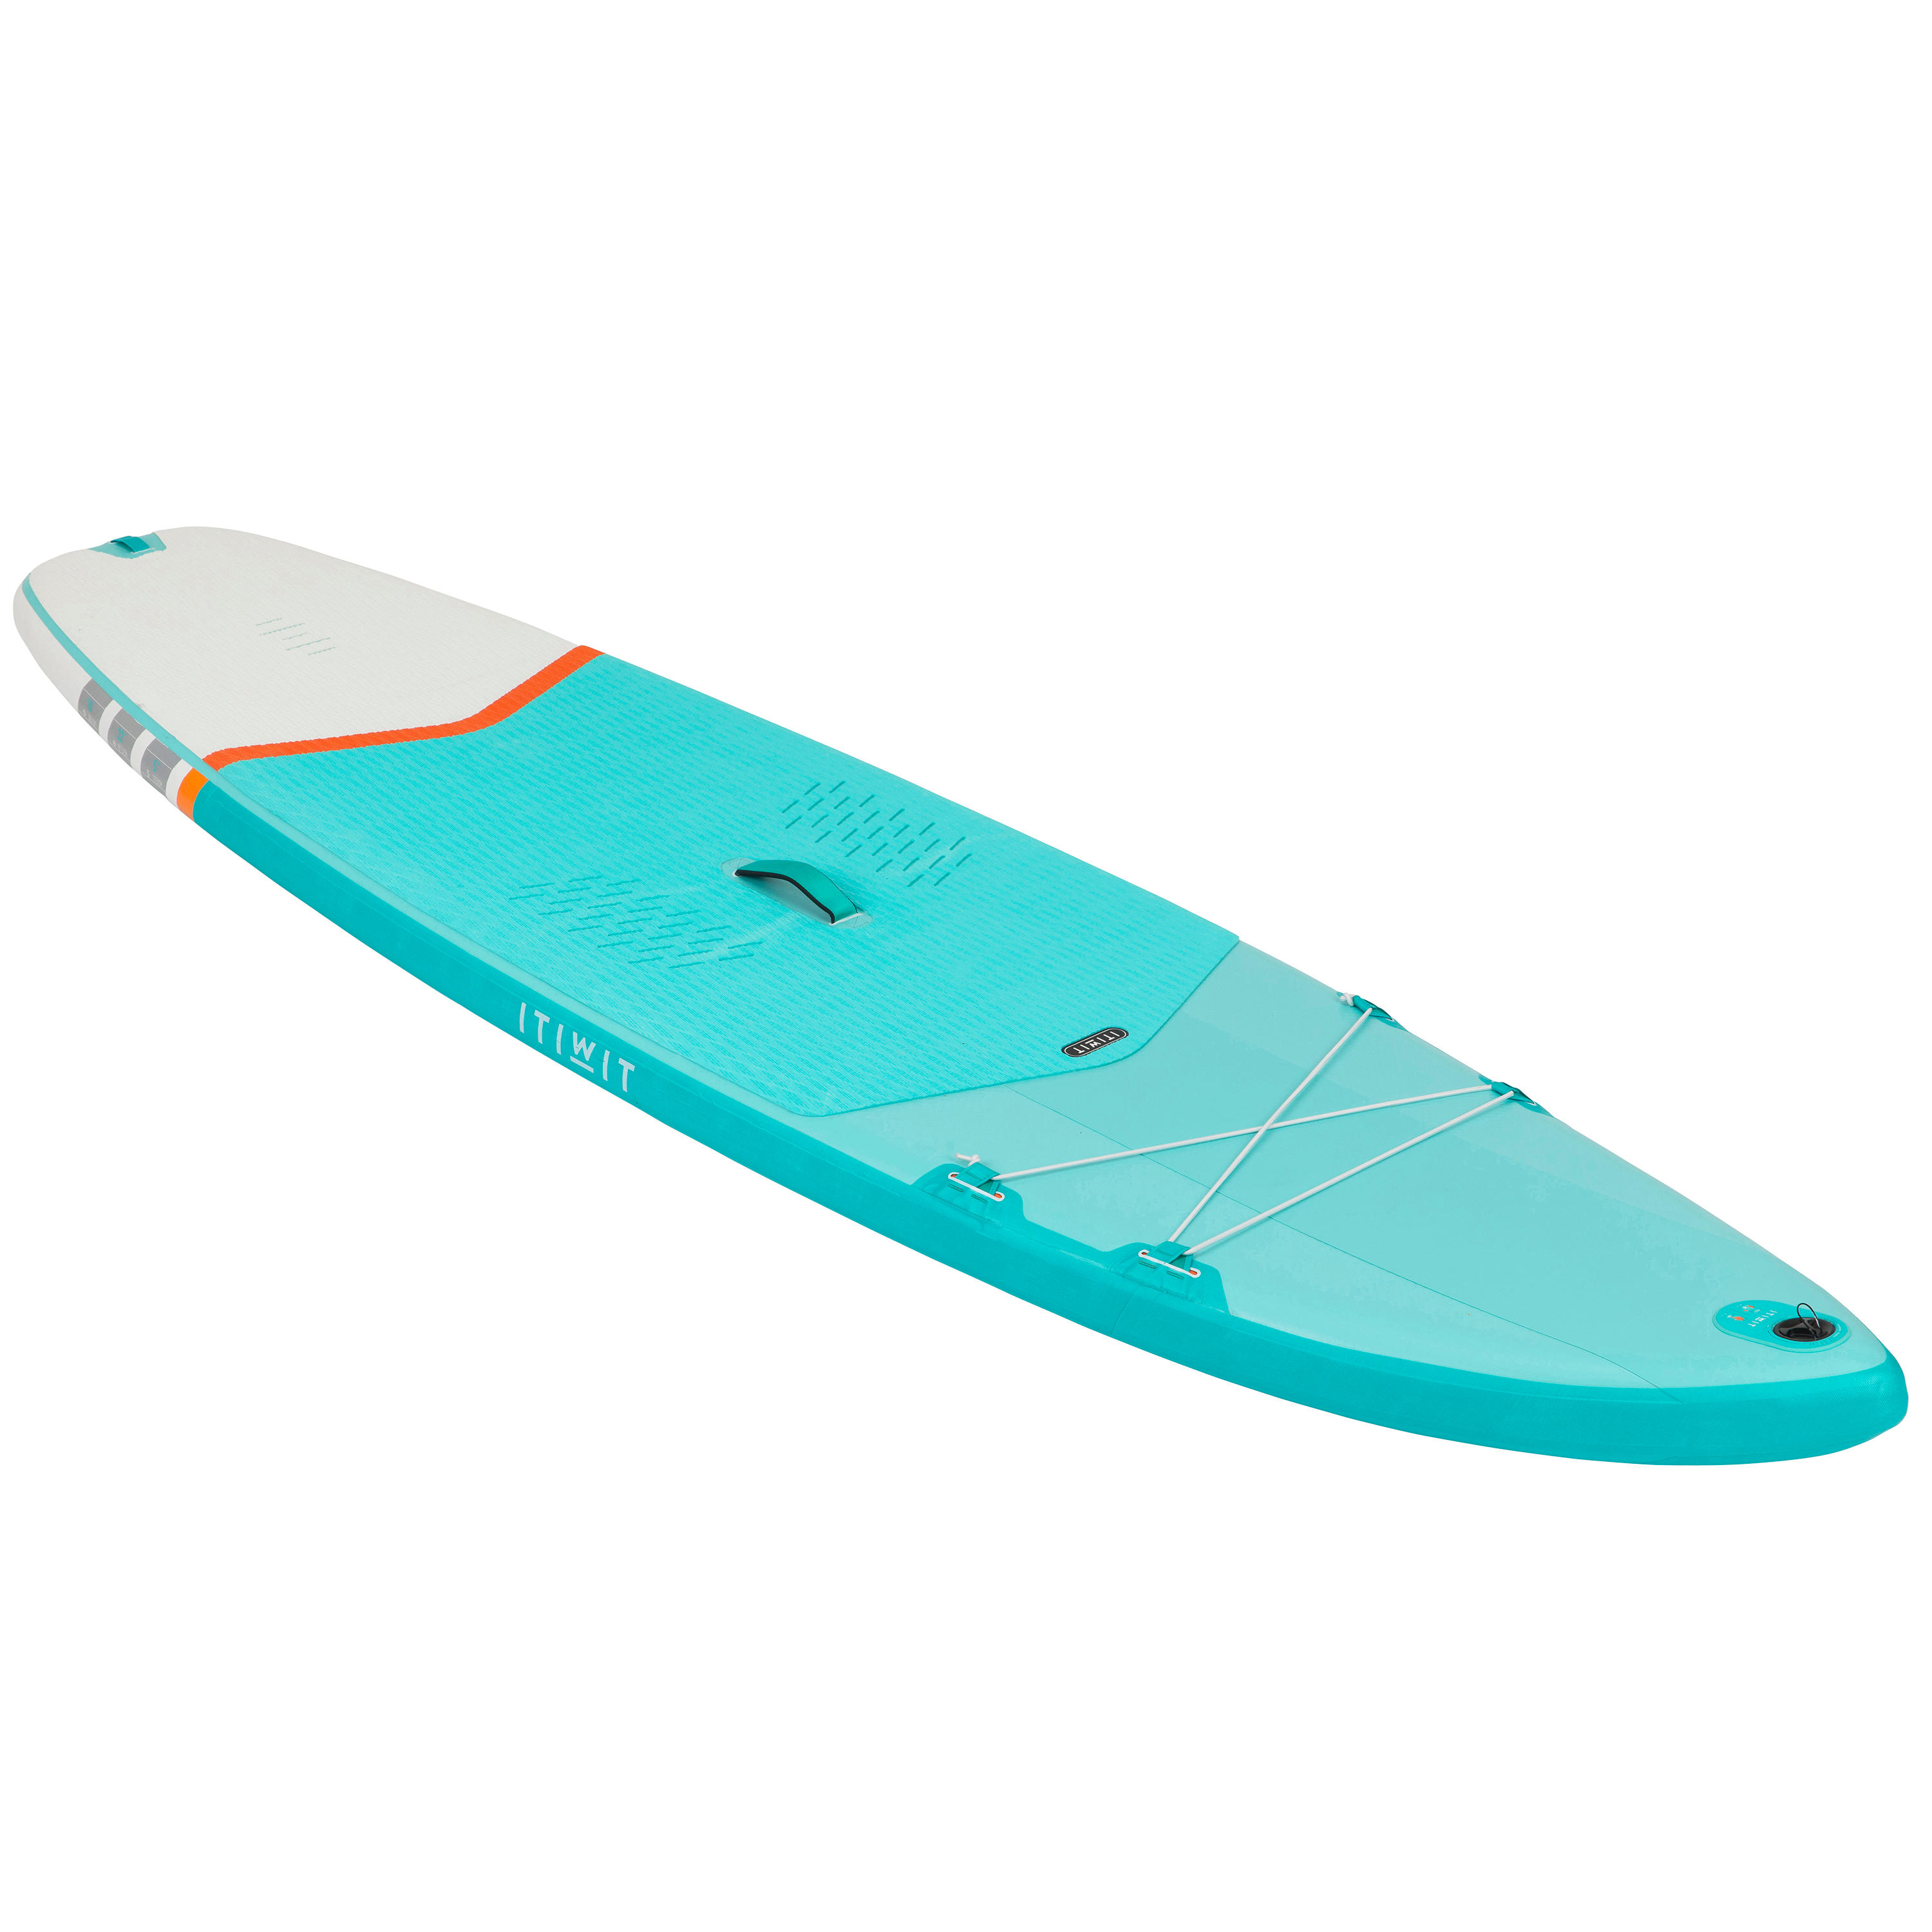 X100 10FT TOURING INFLATABLE STAND-UP PADDLEBOARD - GREEN 5/17